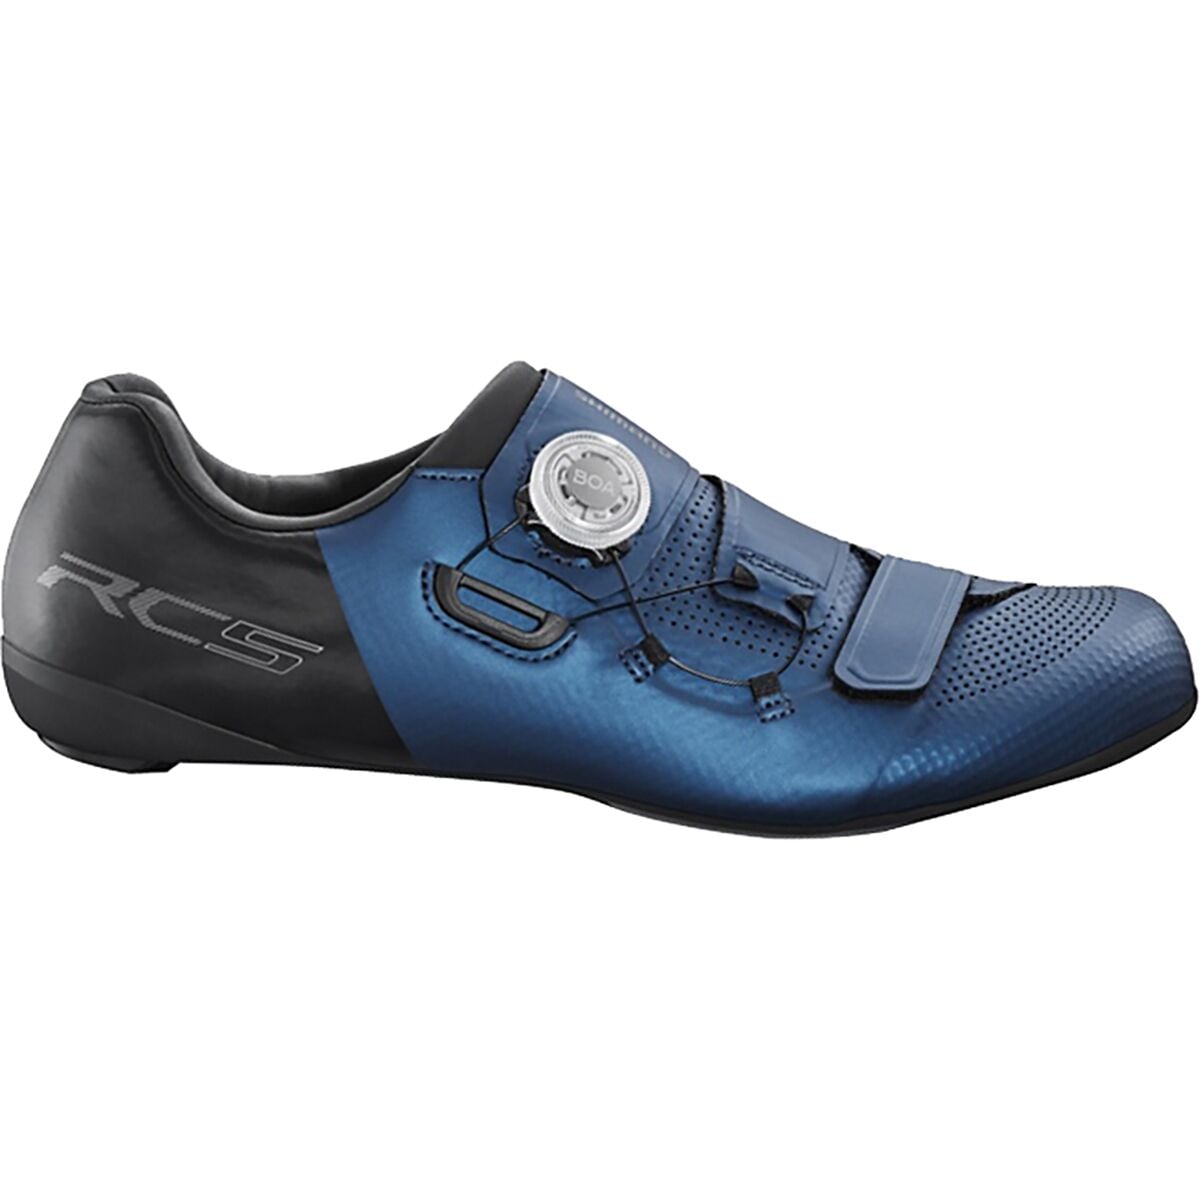 Shimano RC502 Limited Edition Cycling Shoe - Men's Blue 49.0